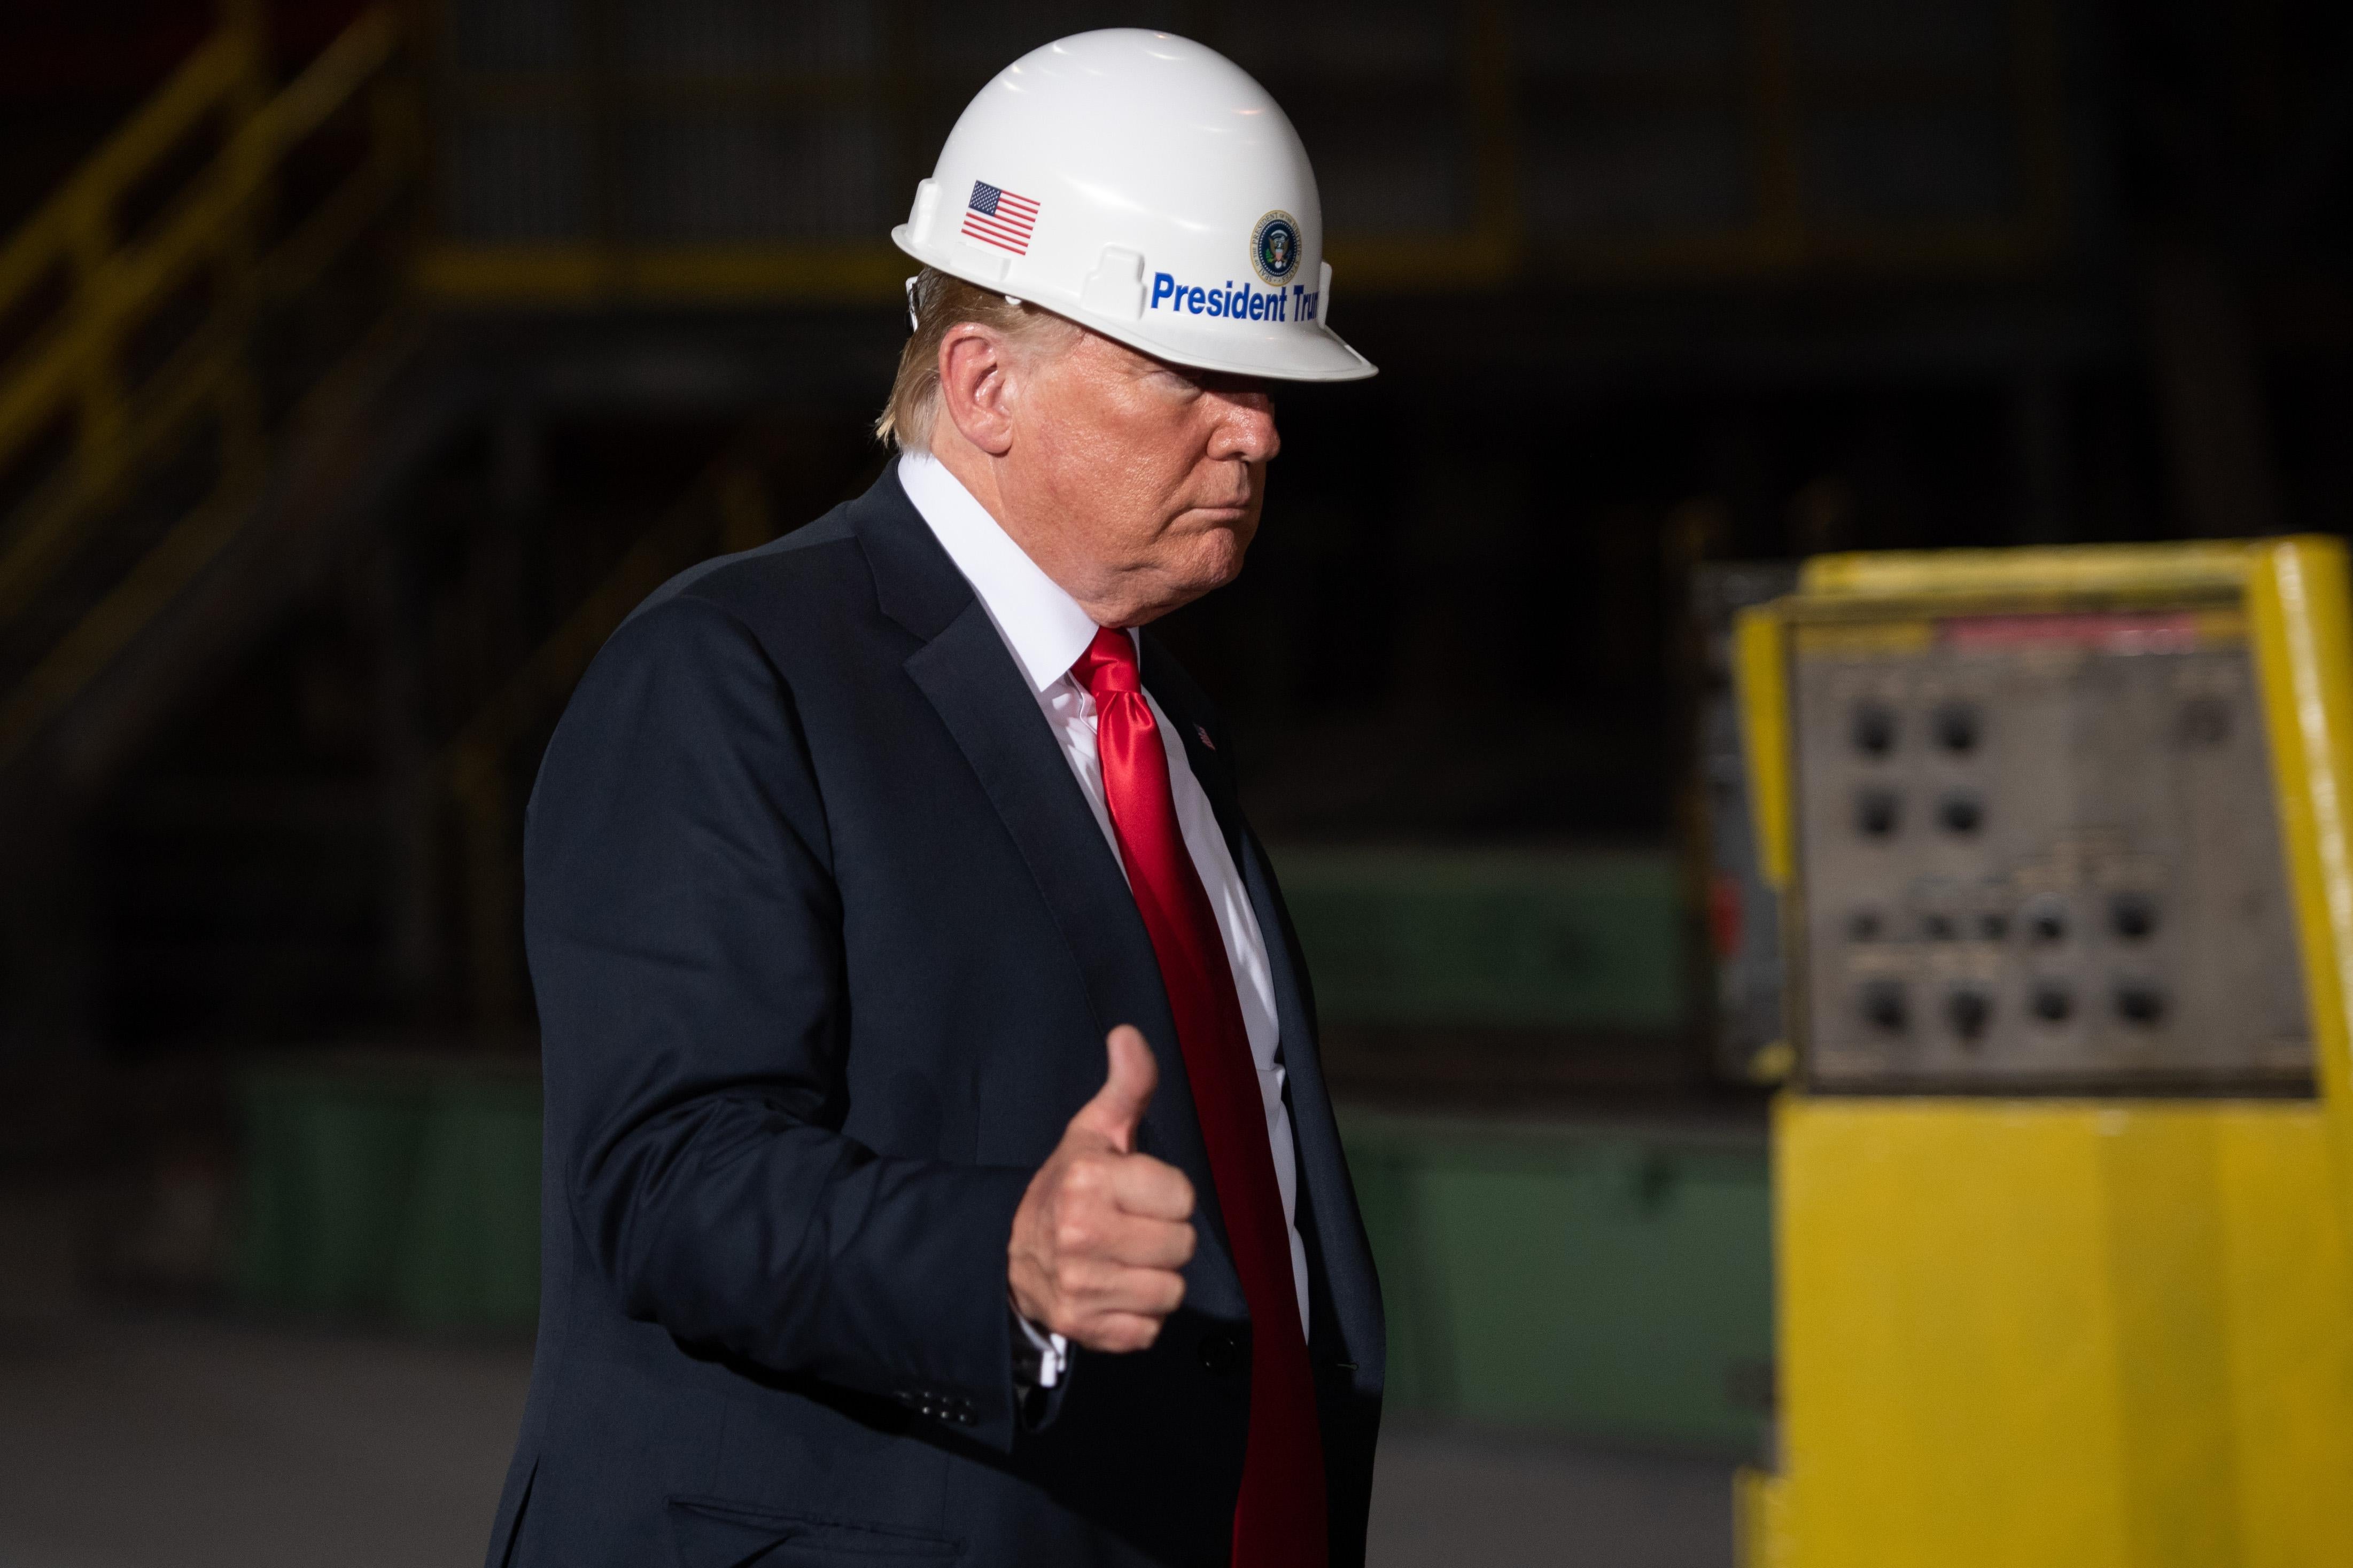 President Donald Trump wearing a hard hat, giving a thumbs up